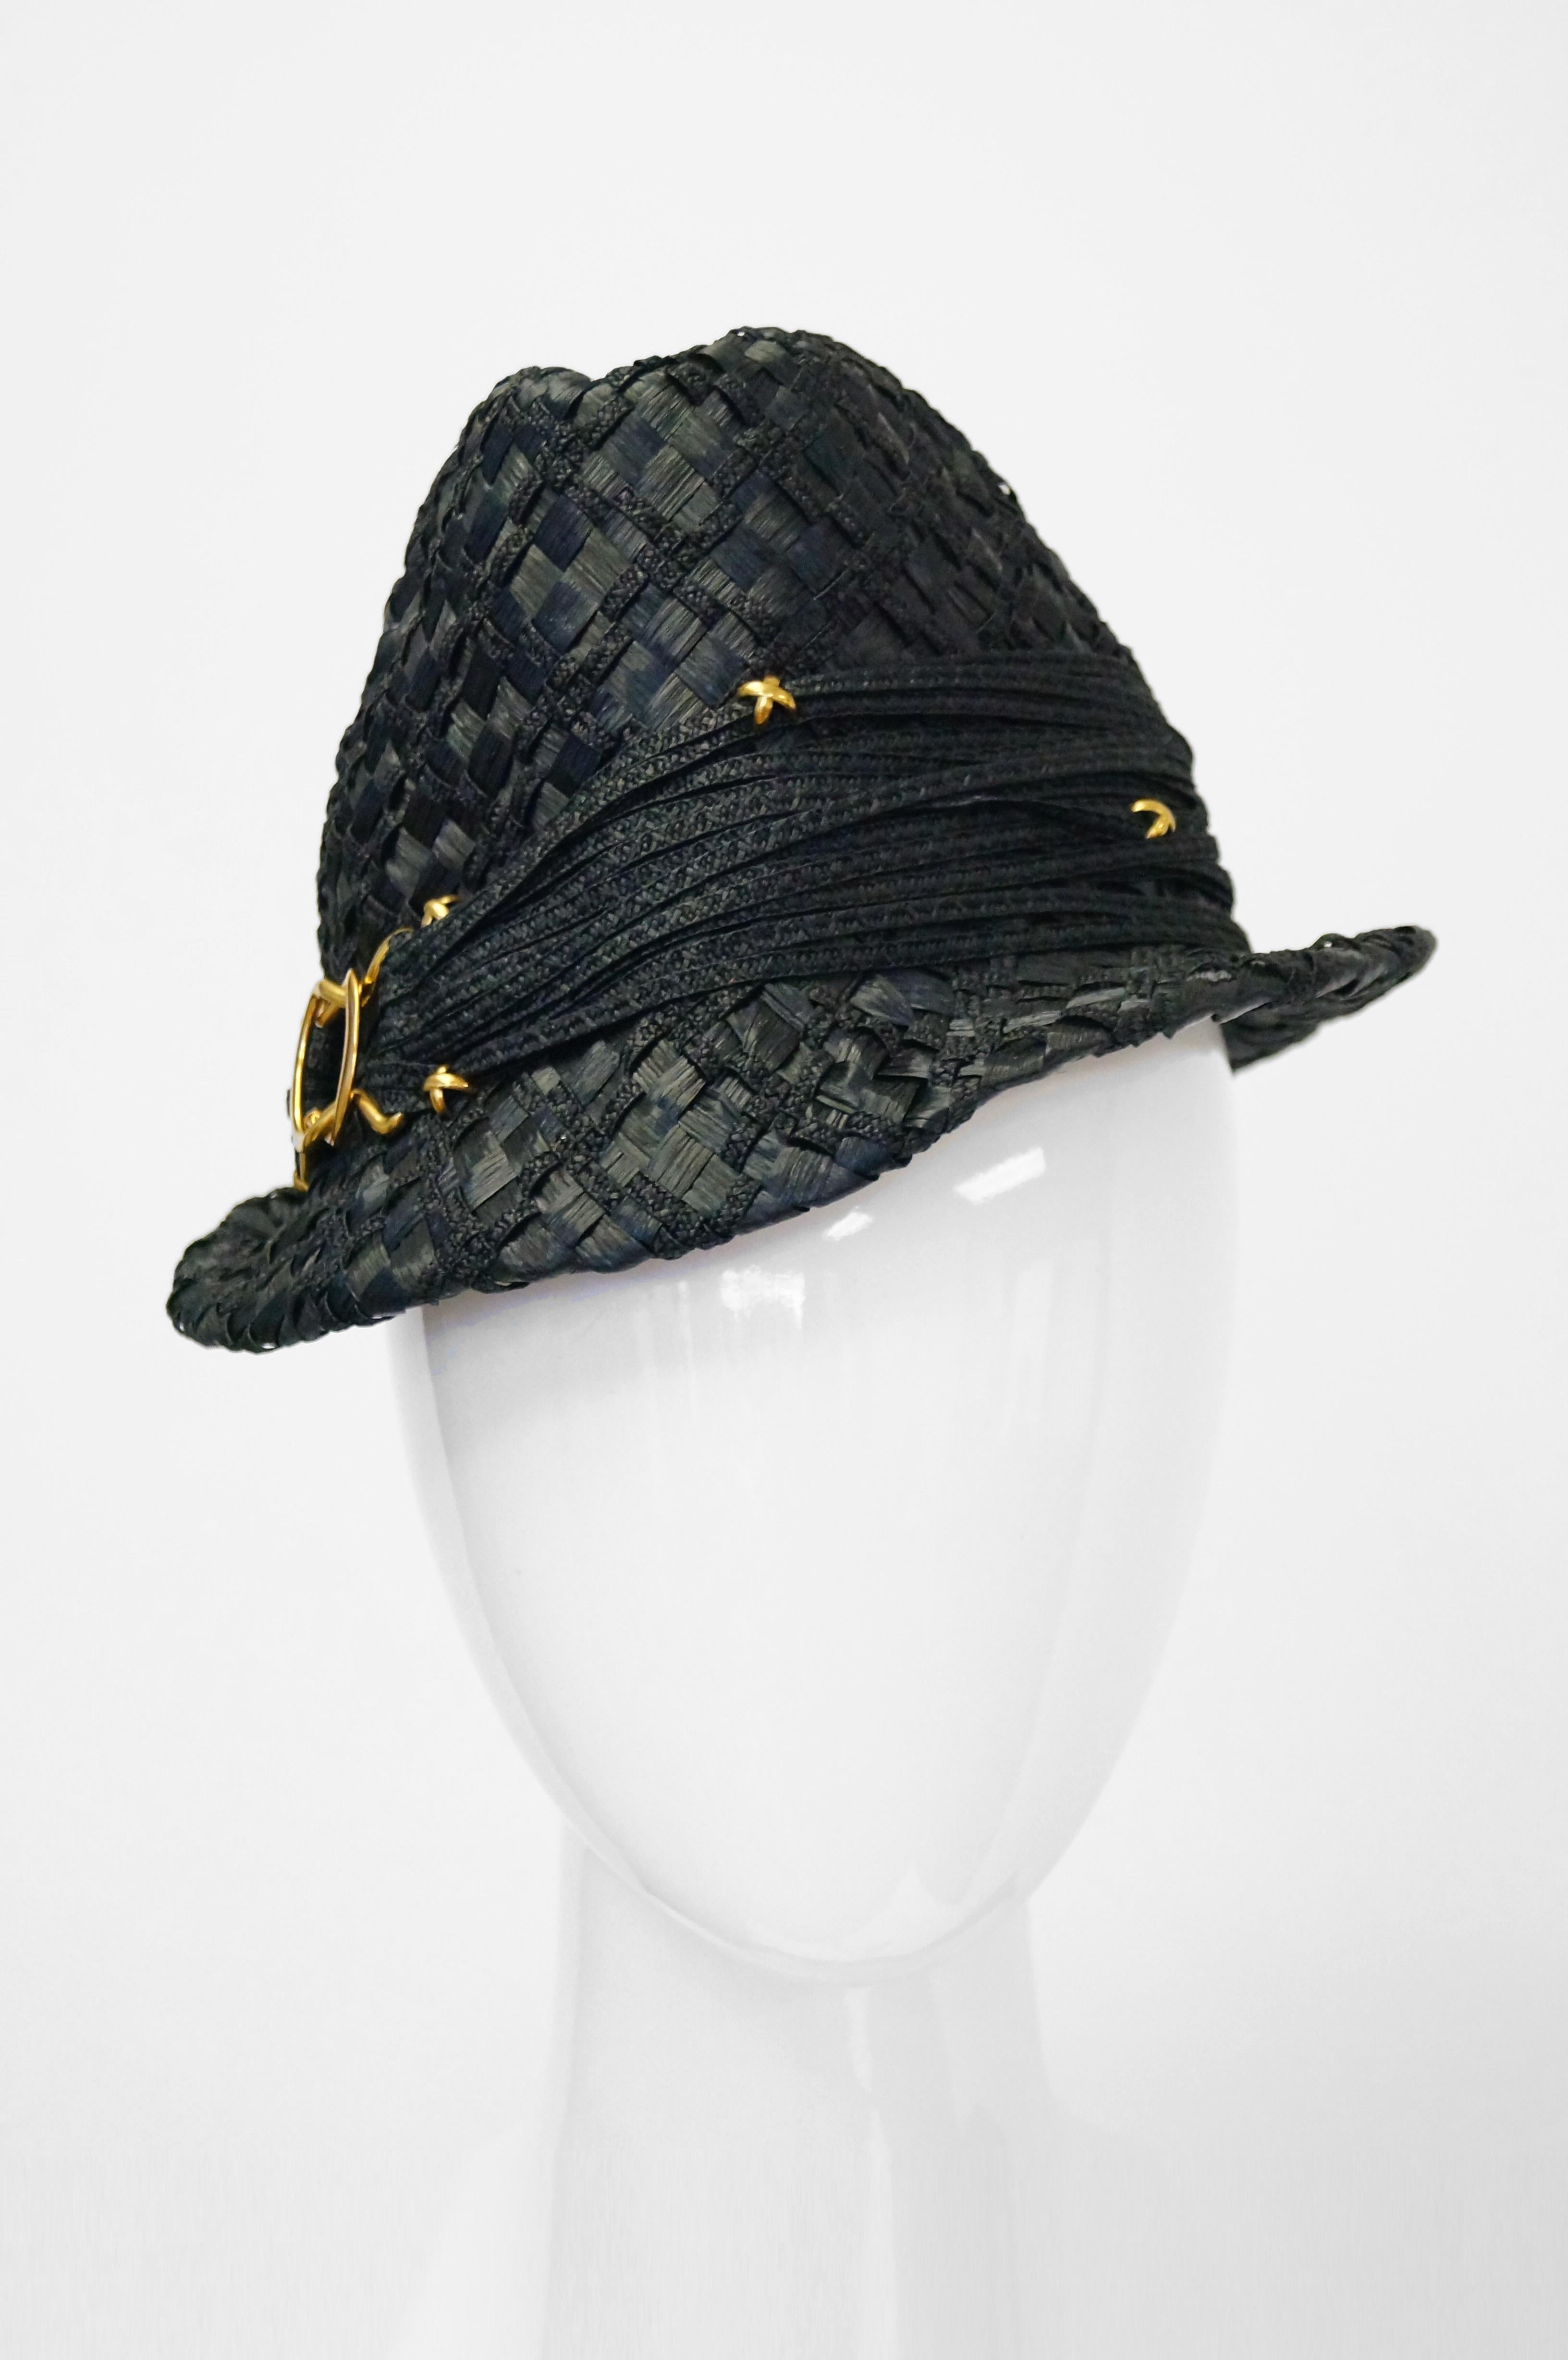 Fabulous black glossy woven raffia sun hat by YSL! This Yves Saint Laurent trilby features a medium brim, high crown, and band composed of multiple strands of braided rope, accented by a circular gold tone buckle. 

24 Inch circumference